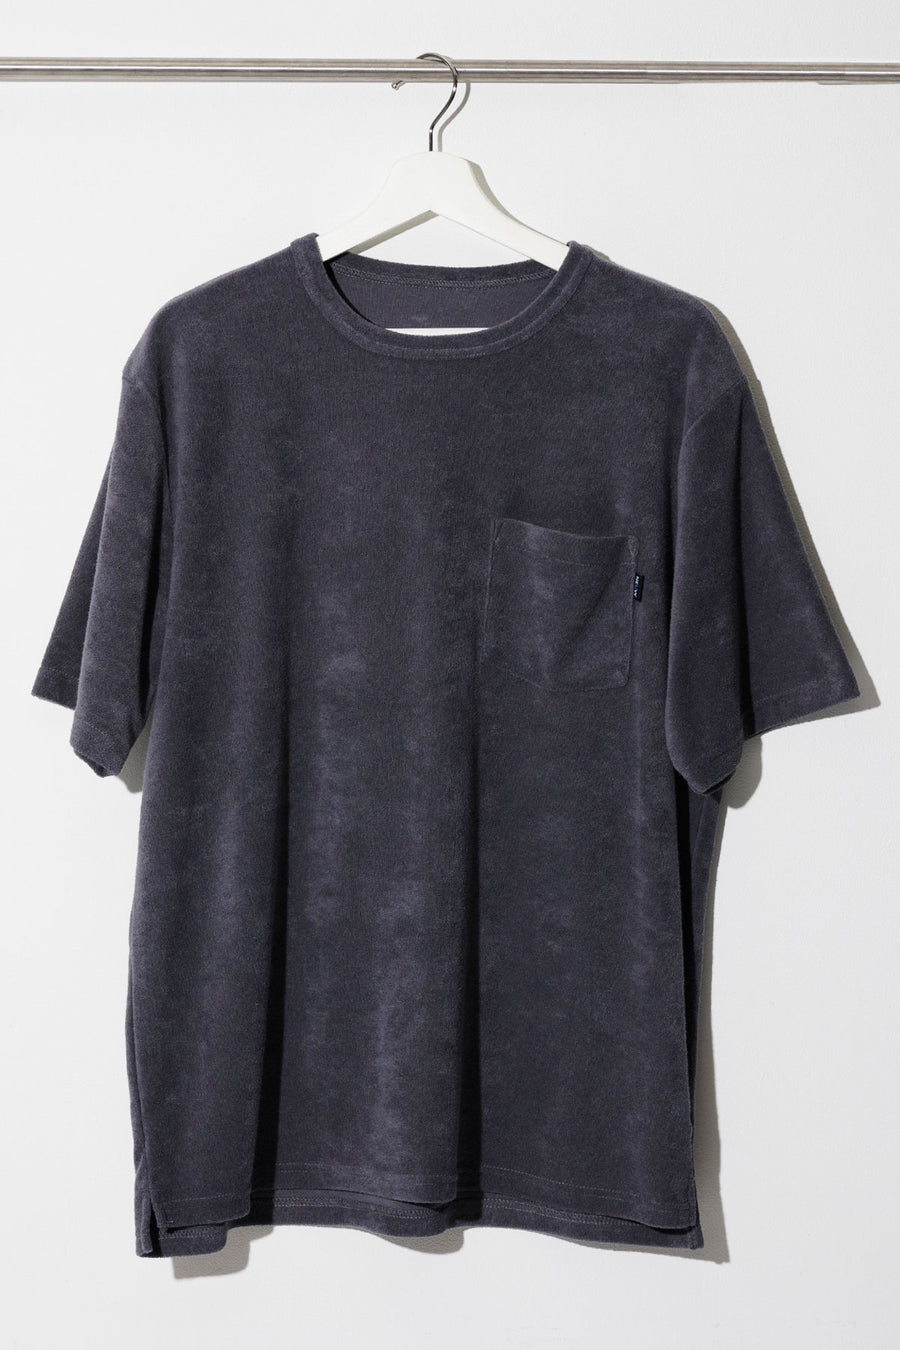 Relux T-SHIRT（PILE）Chacoal Gray [New ITEM]